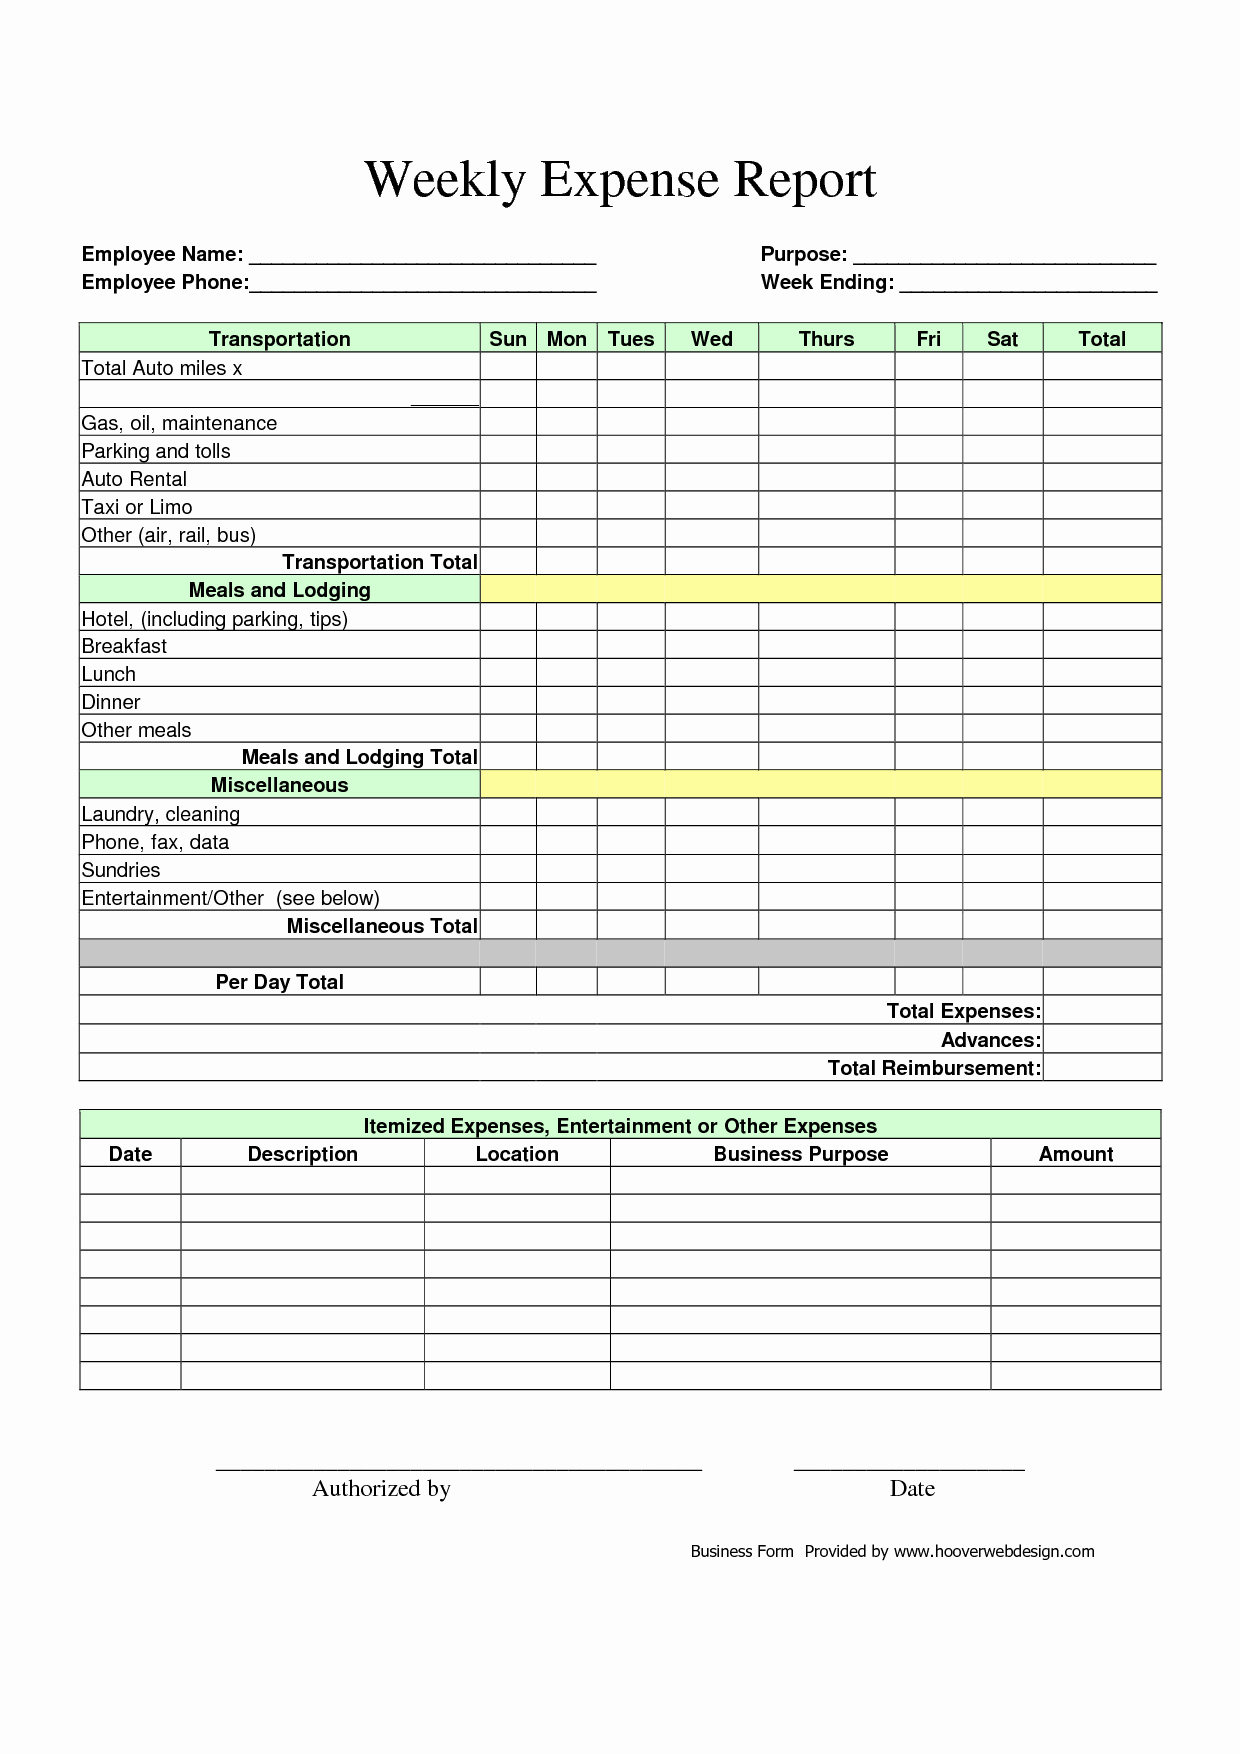 Expense Report Template Excel Beautiful Blank Expense Report Portablegasgrillweber